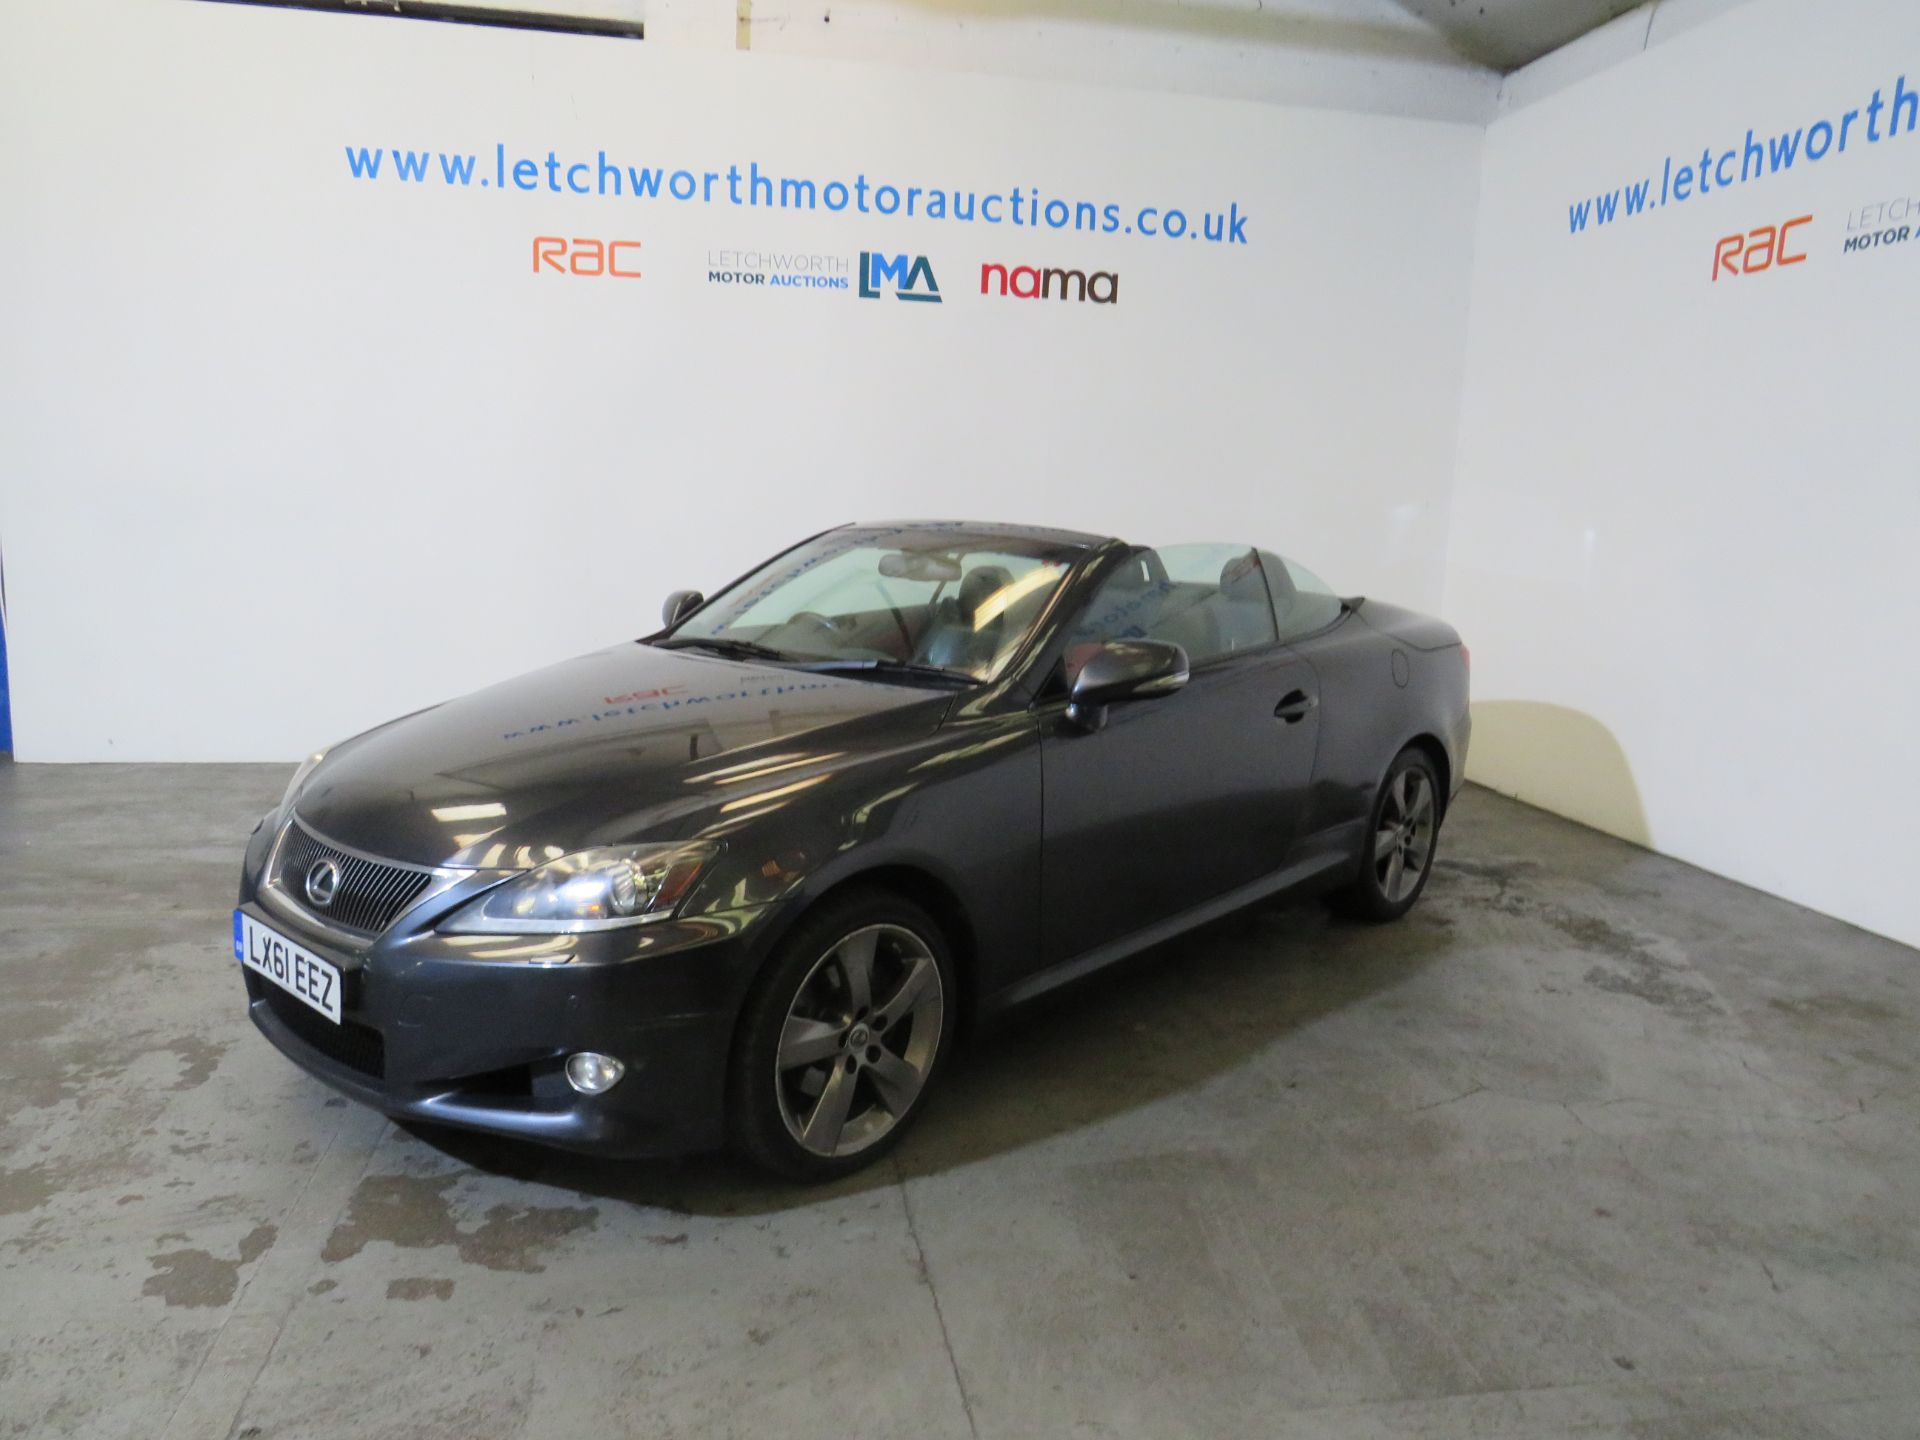 2011 Lexus IS 250C Limited Edition Auto - 2499cc - Image 5 of 15